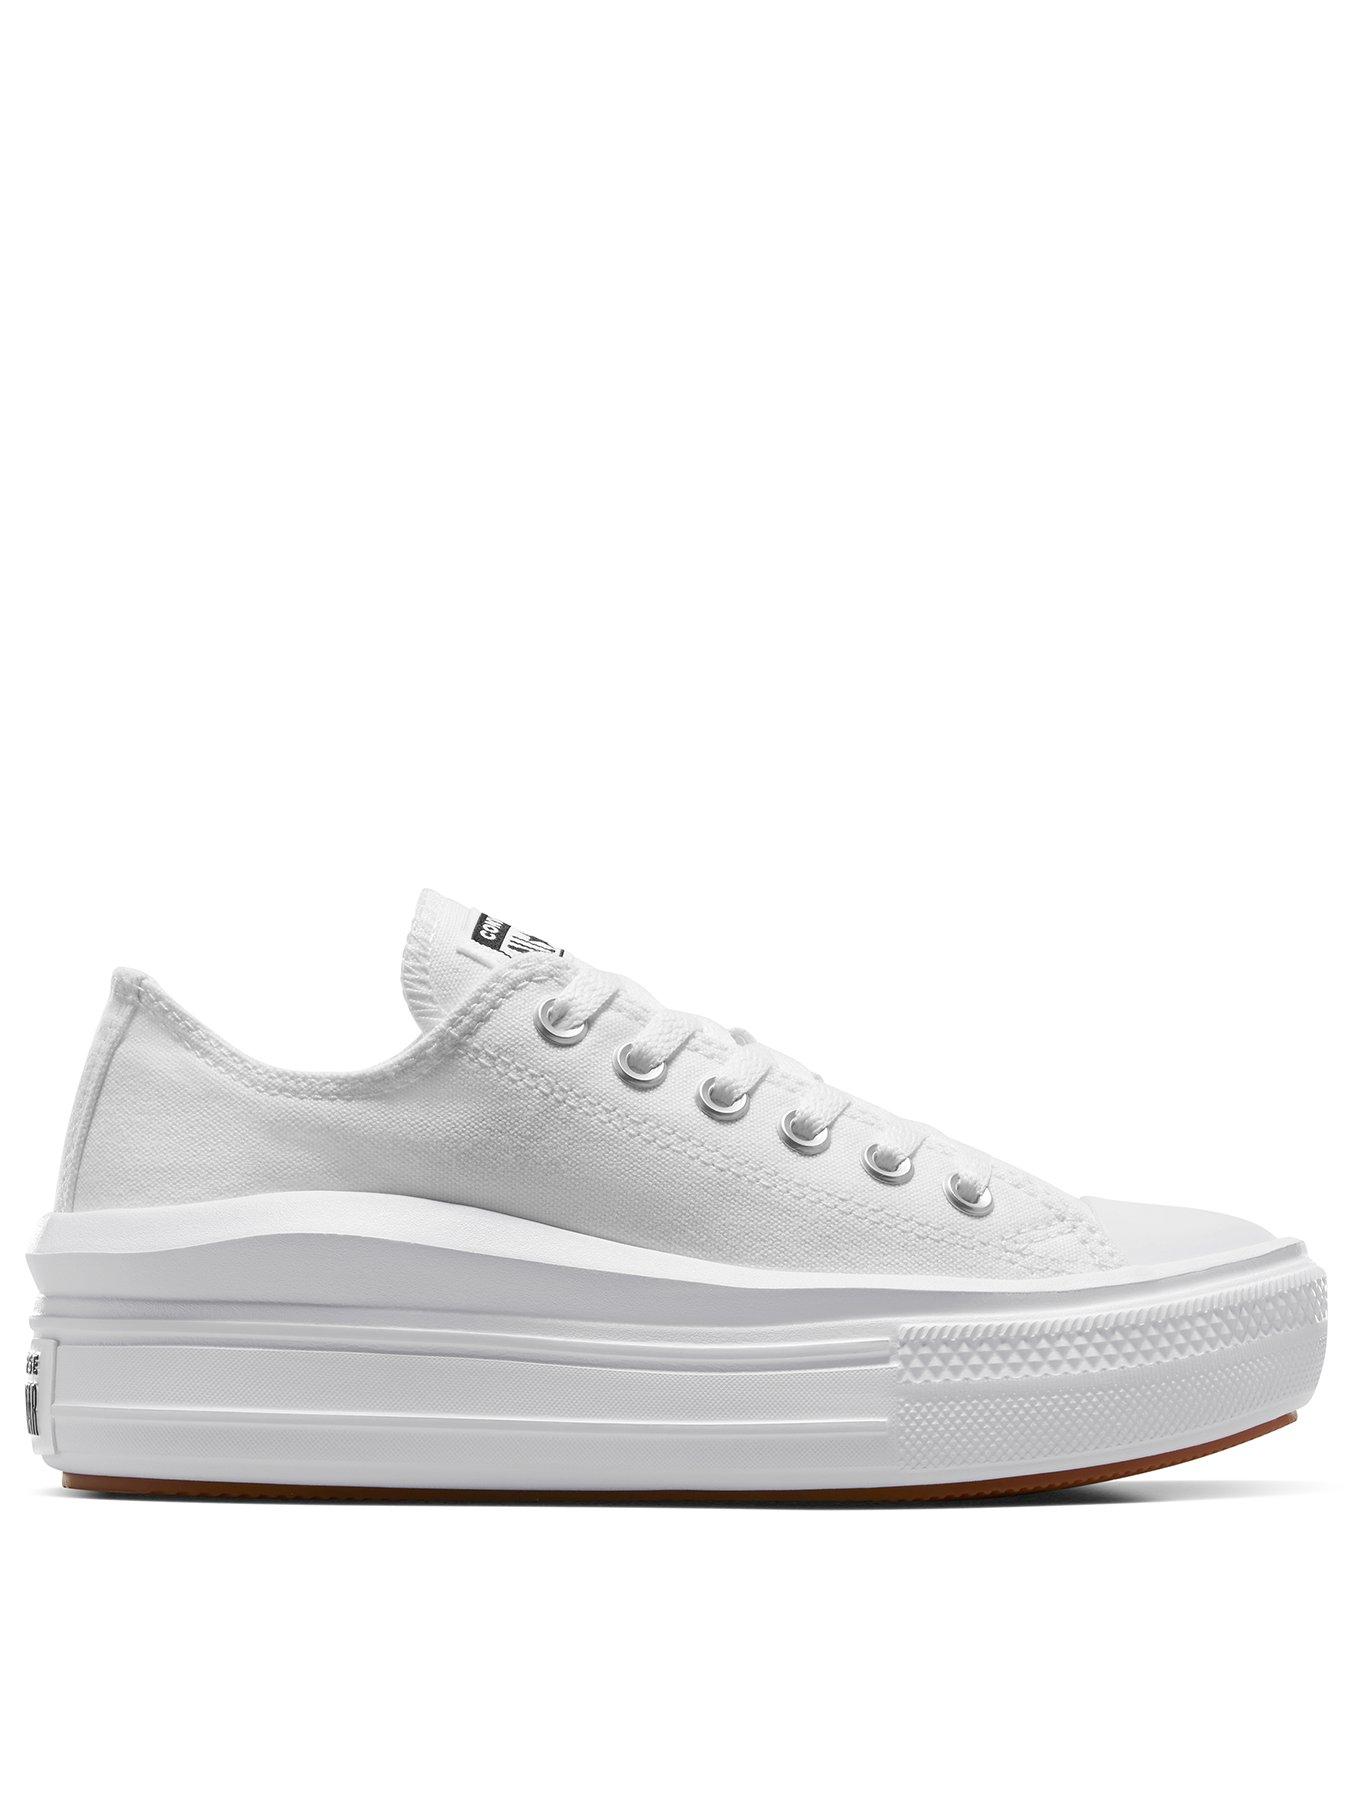  Chuck Taylor All Star Move Ox - White